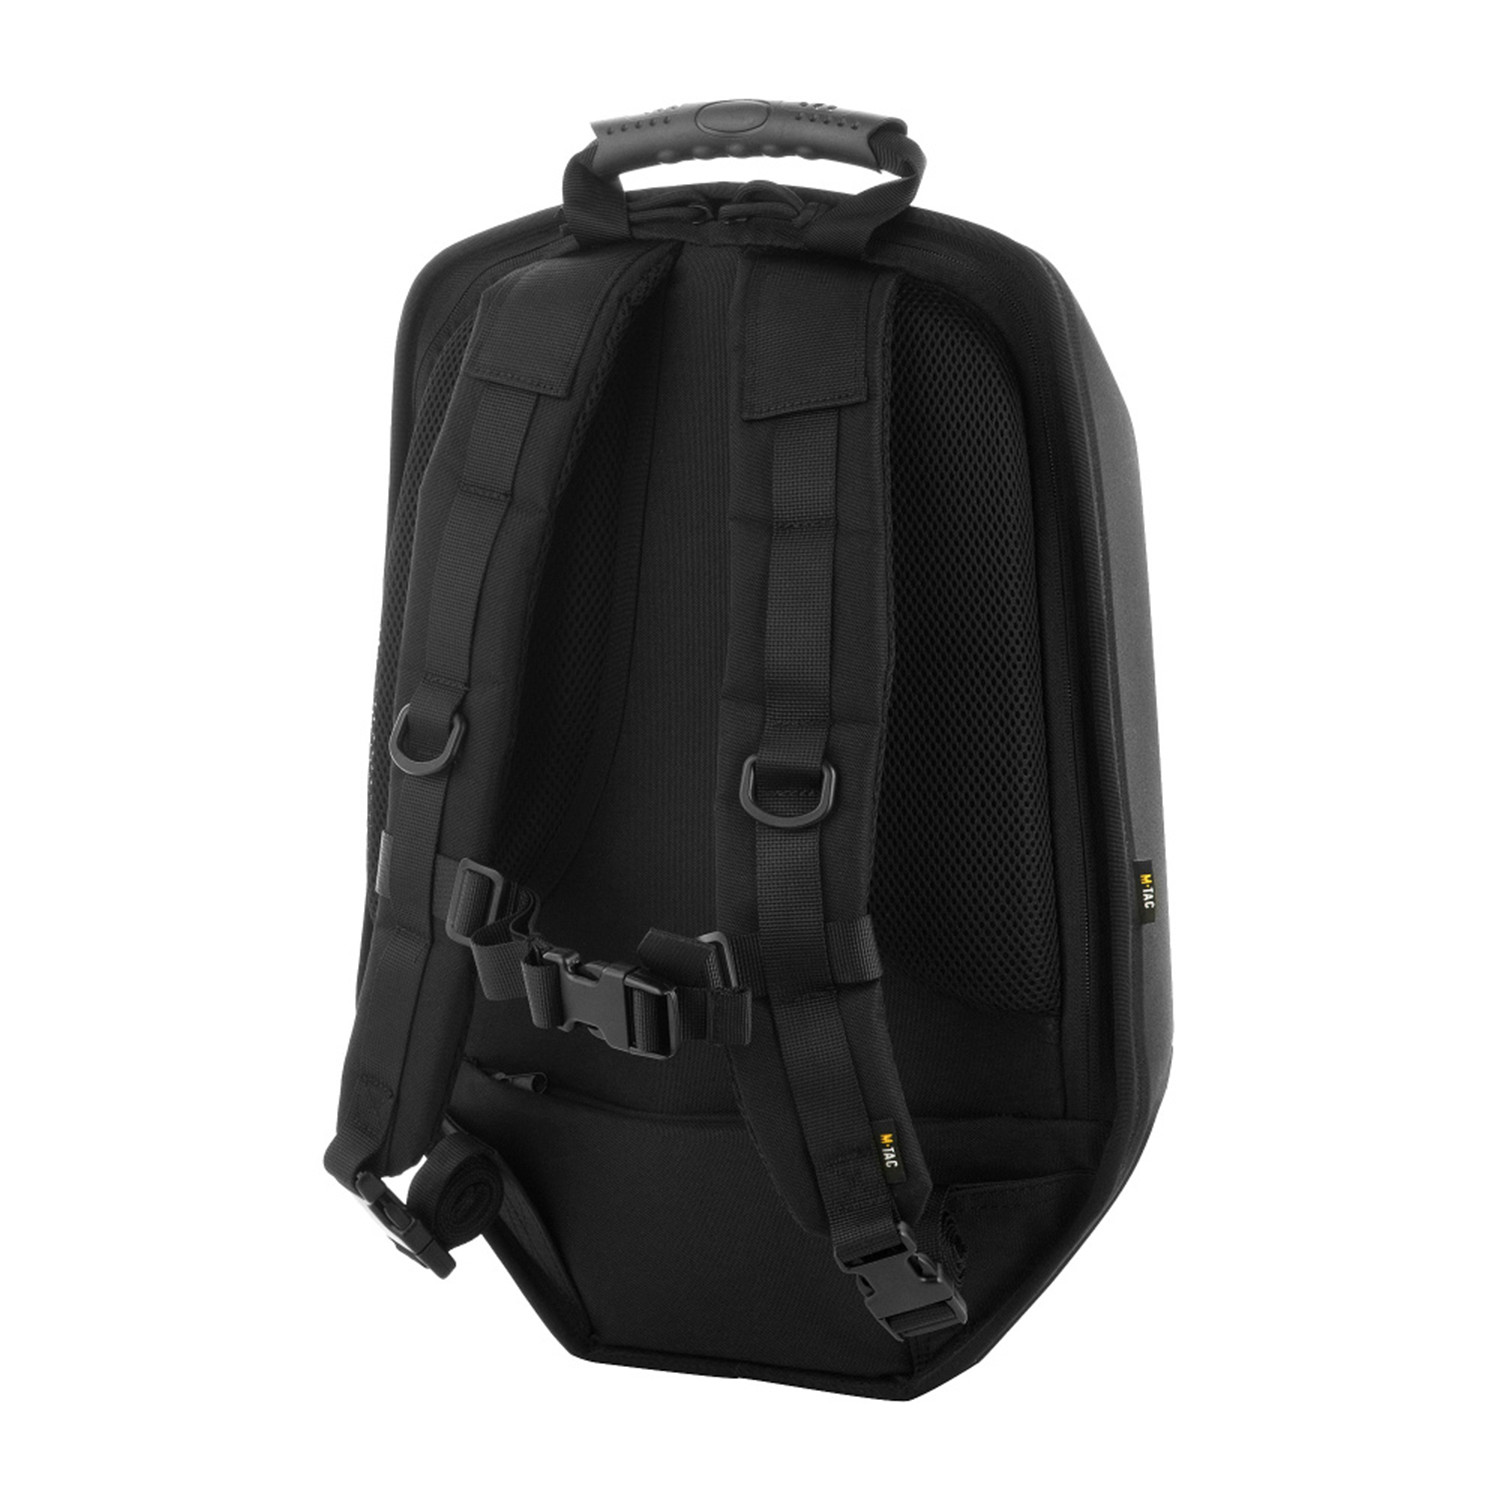 Monte Carlo Bag // Black - M-Tac - Touch of Modern